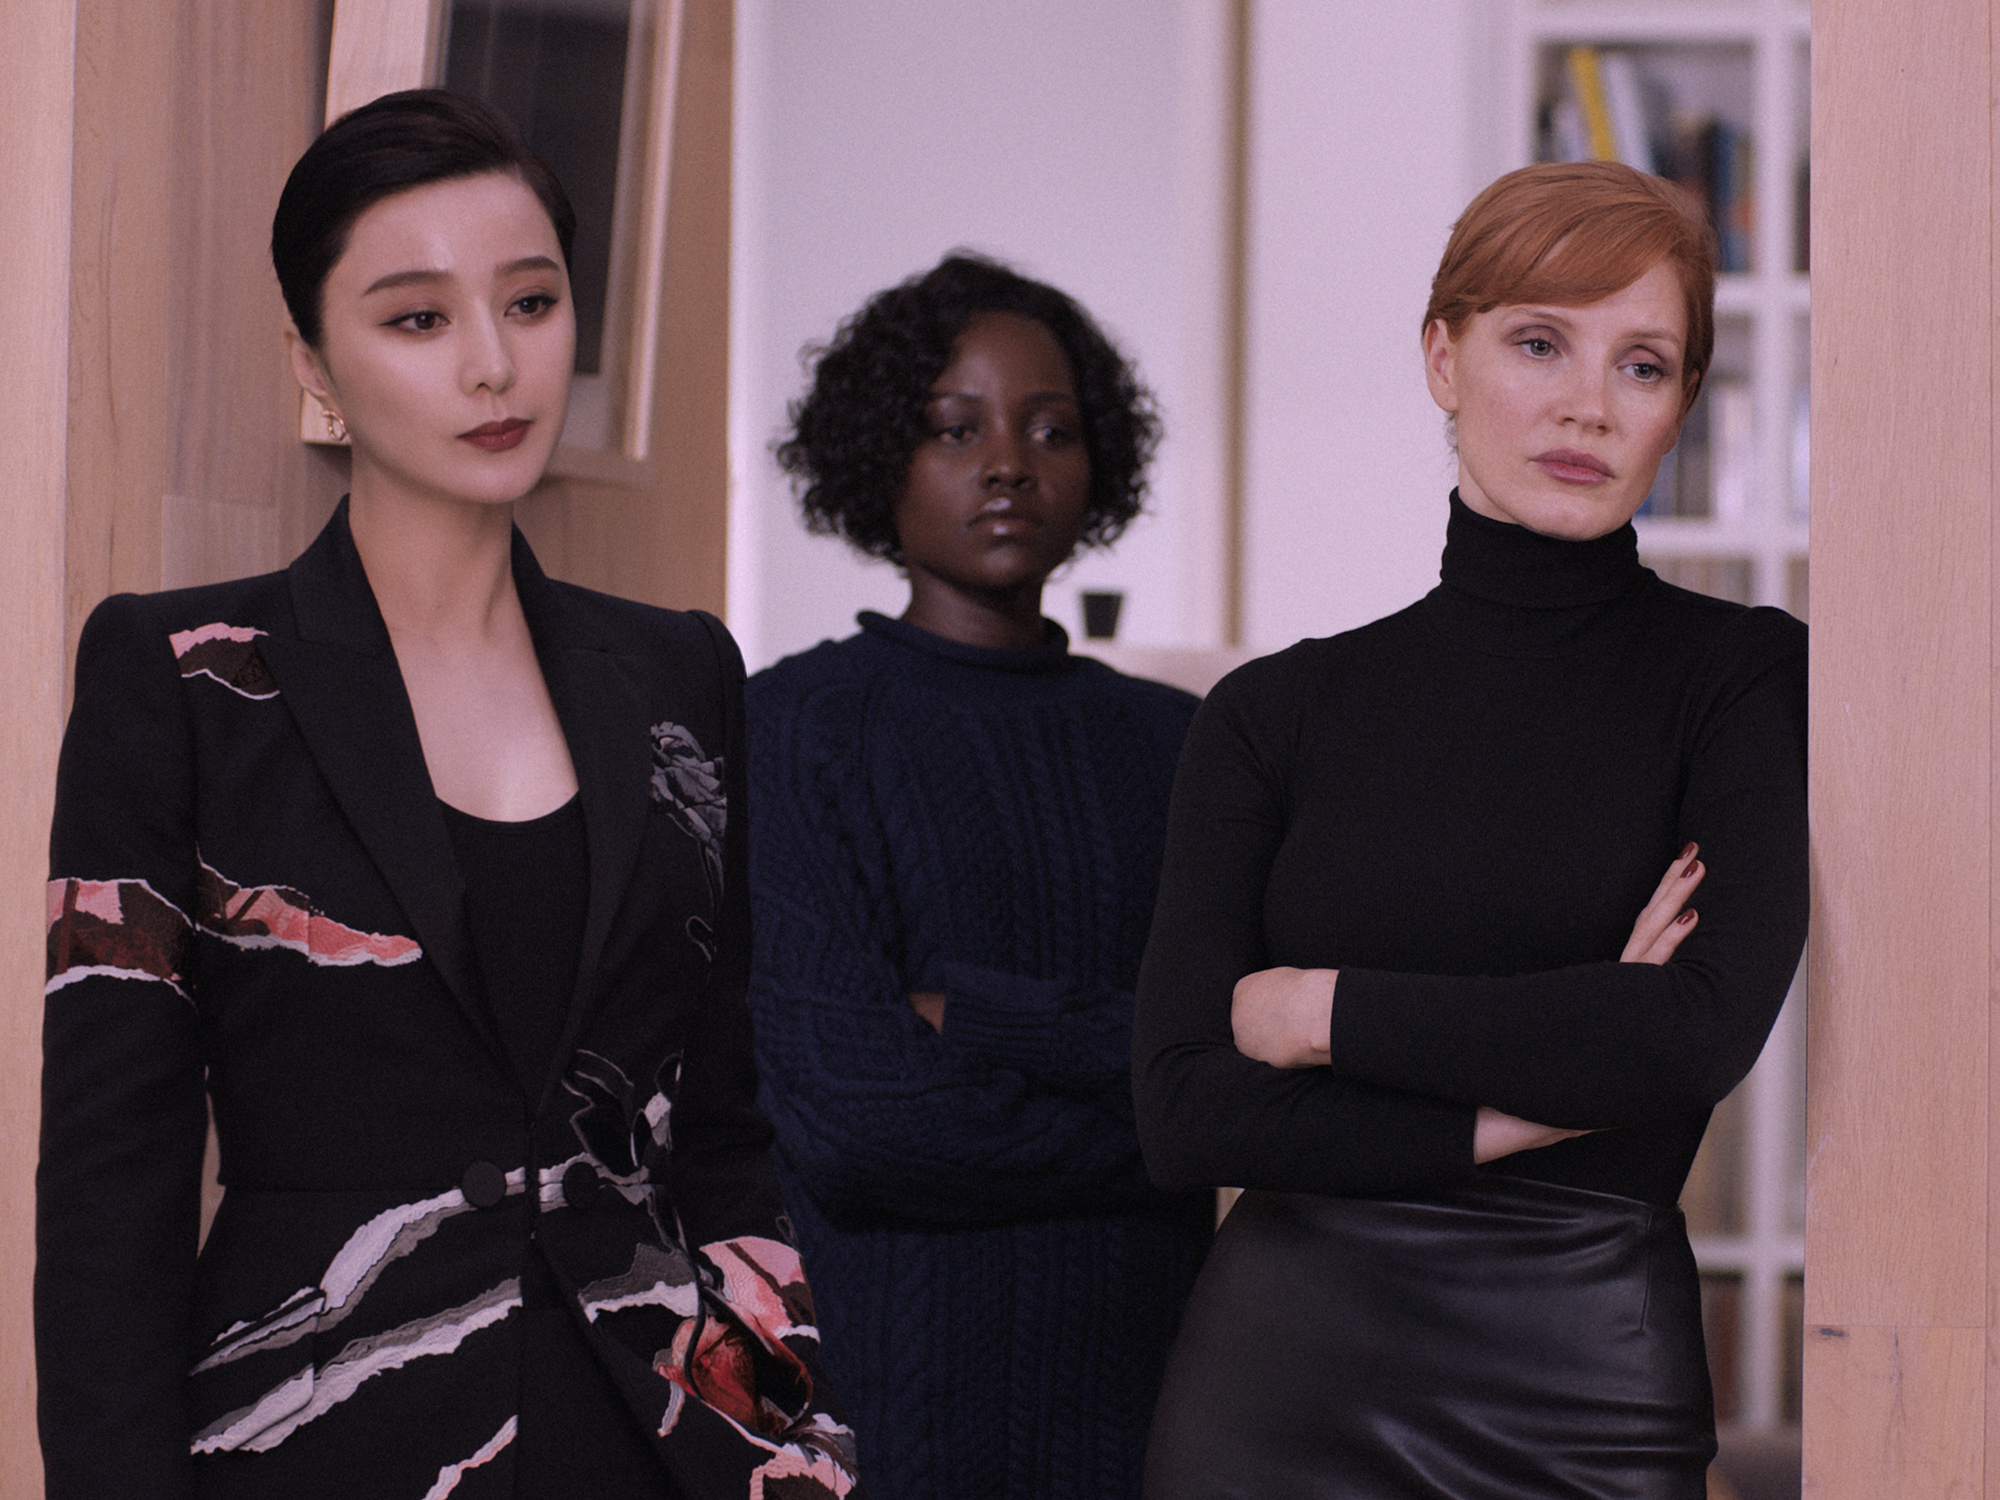 Jessica Chastain Shares First Look at Upcoming All-Female Spy Thriller 355